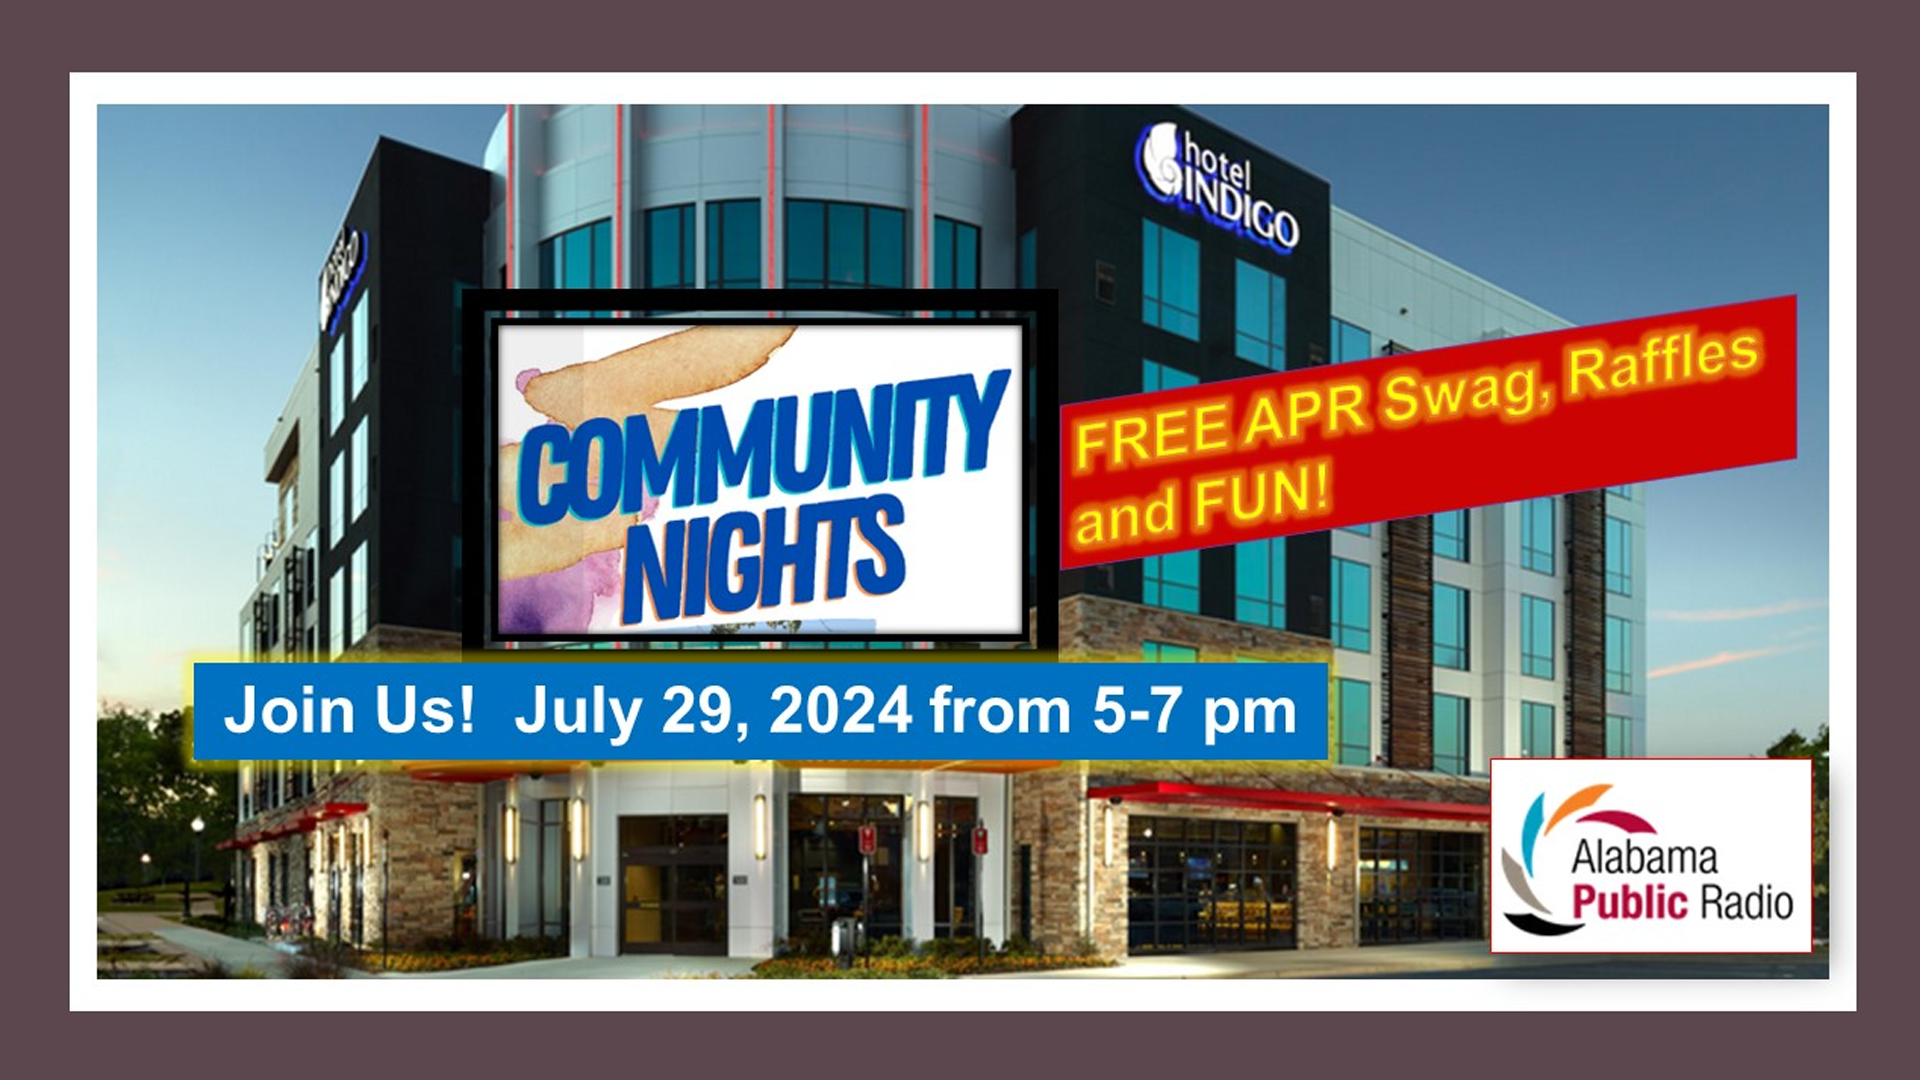 APR Community Night at Lookout Rooftop Bar July 29, 2024 from 5-7pm